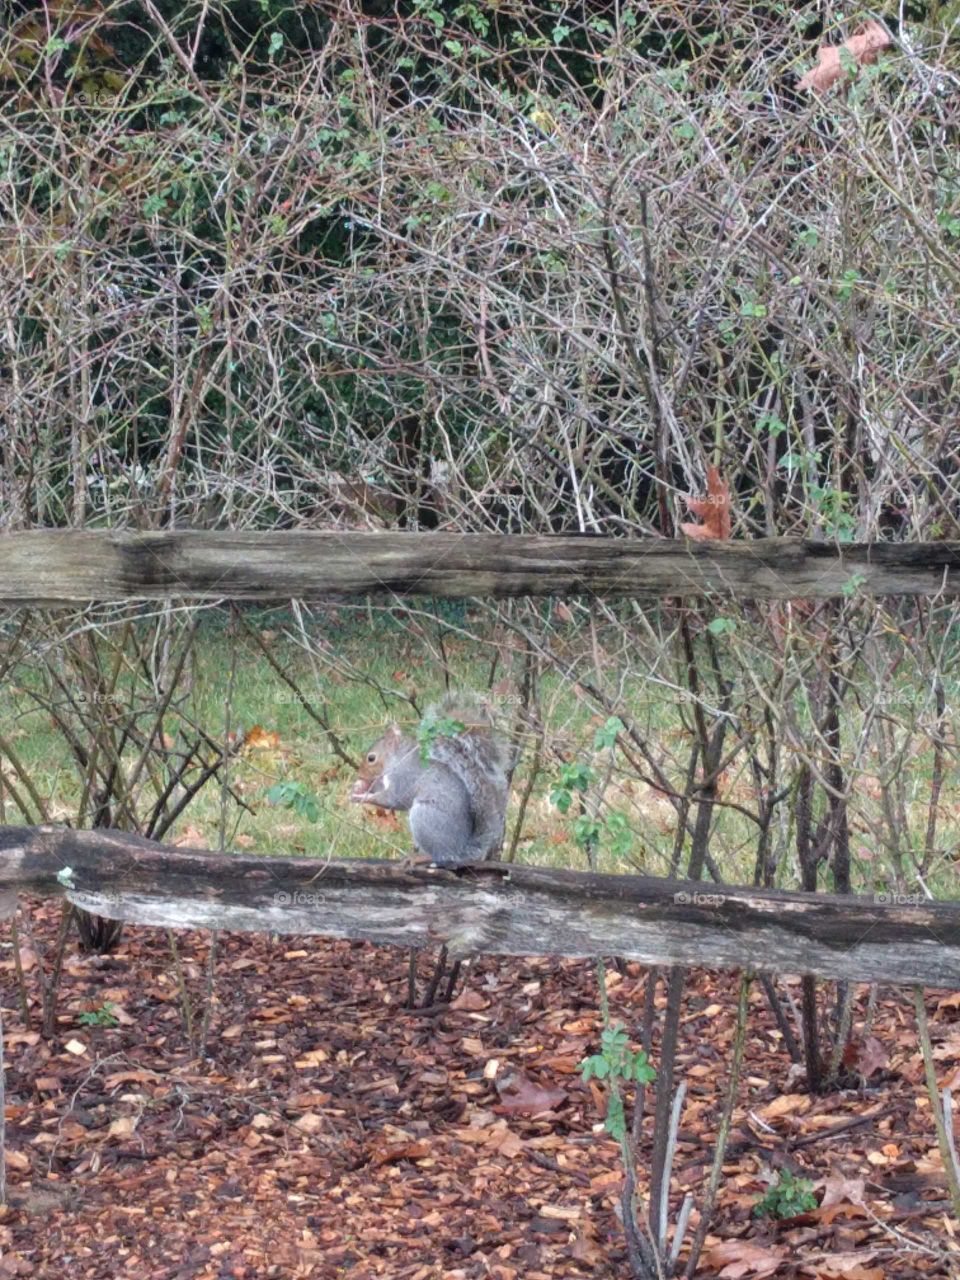 Squirrel eating an acorn on a fence